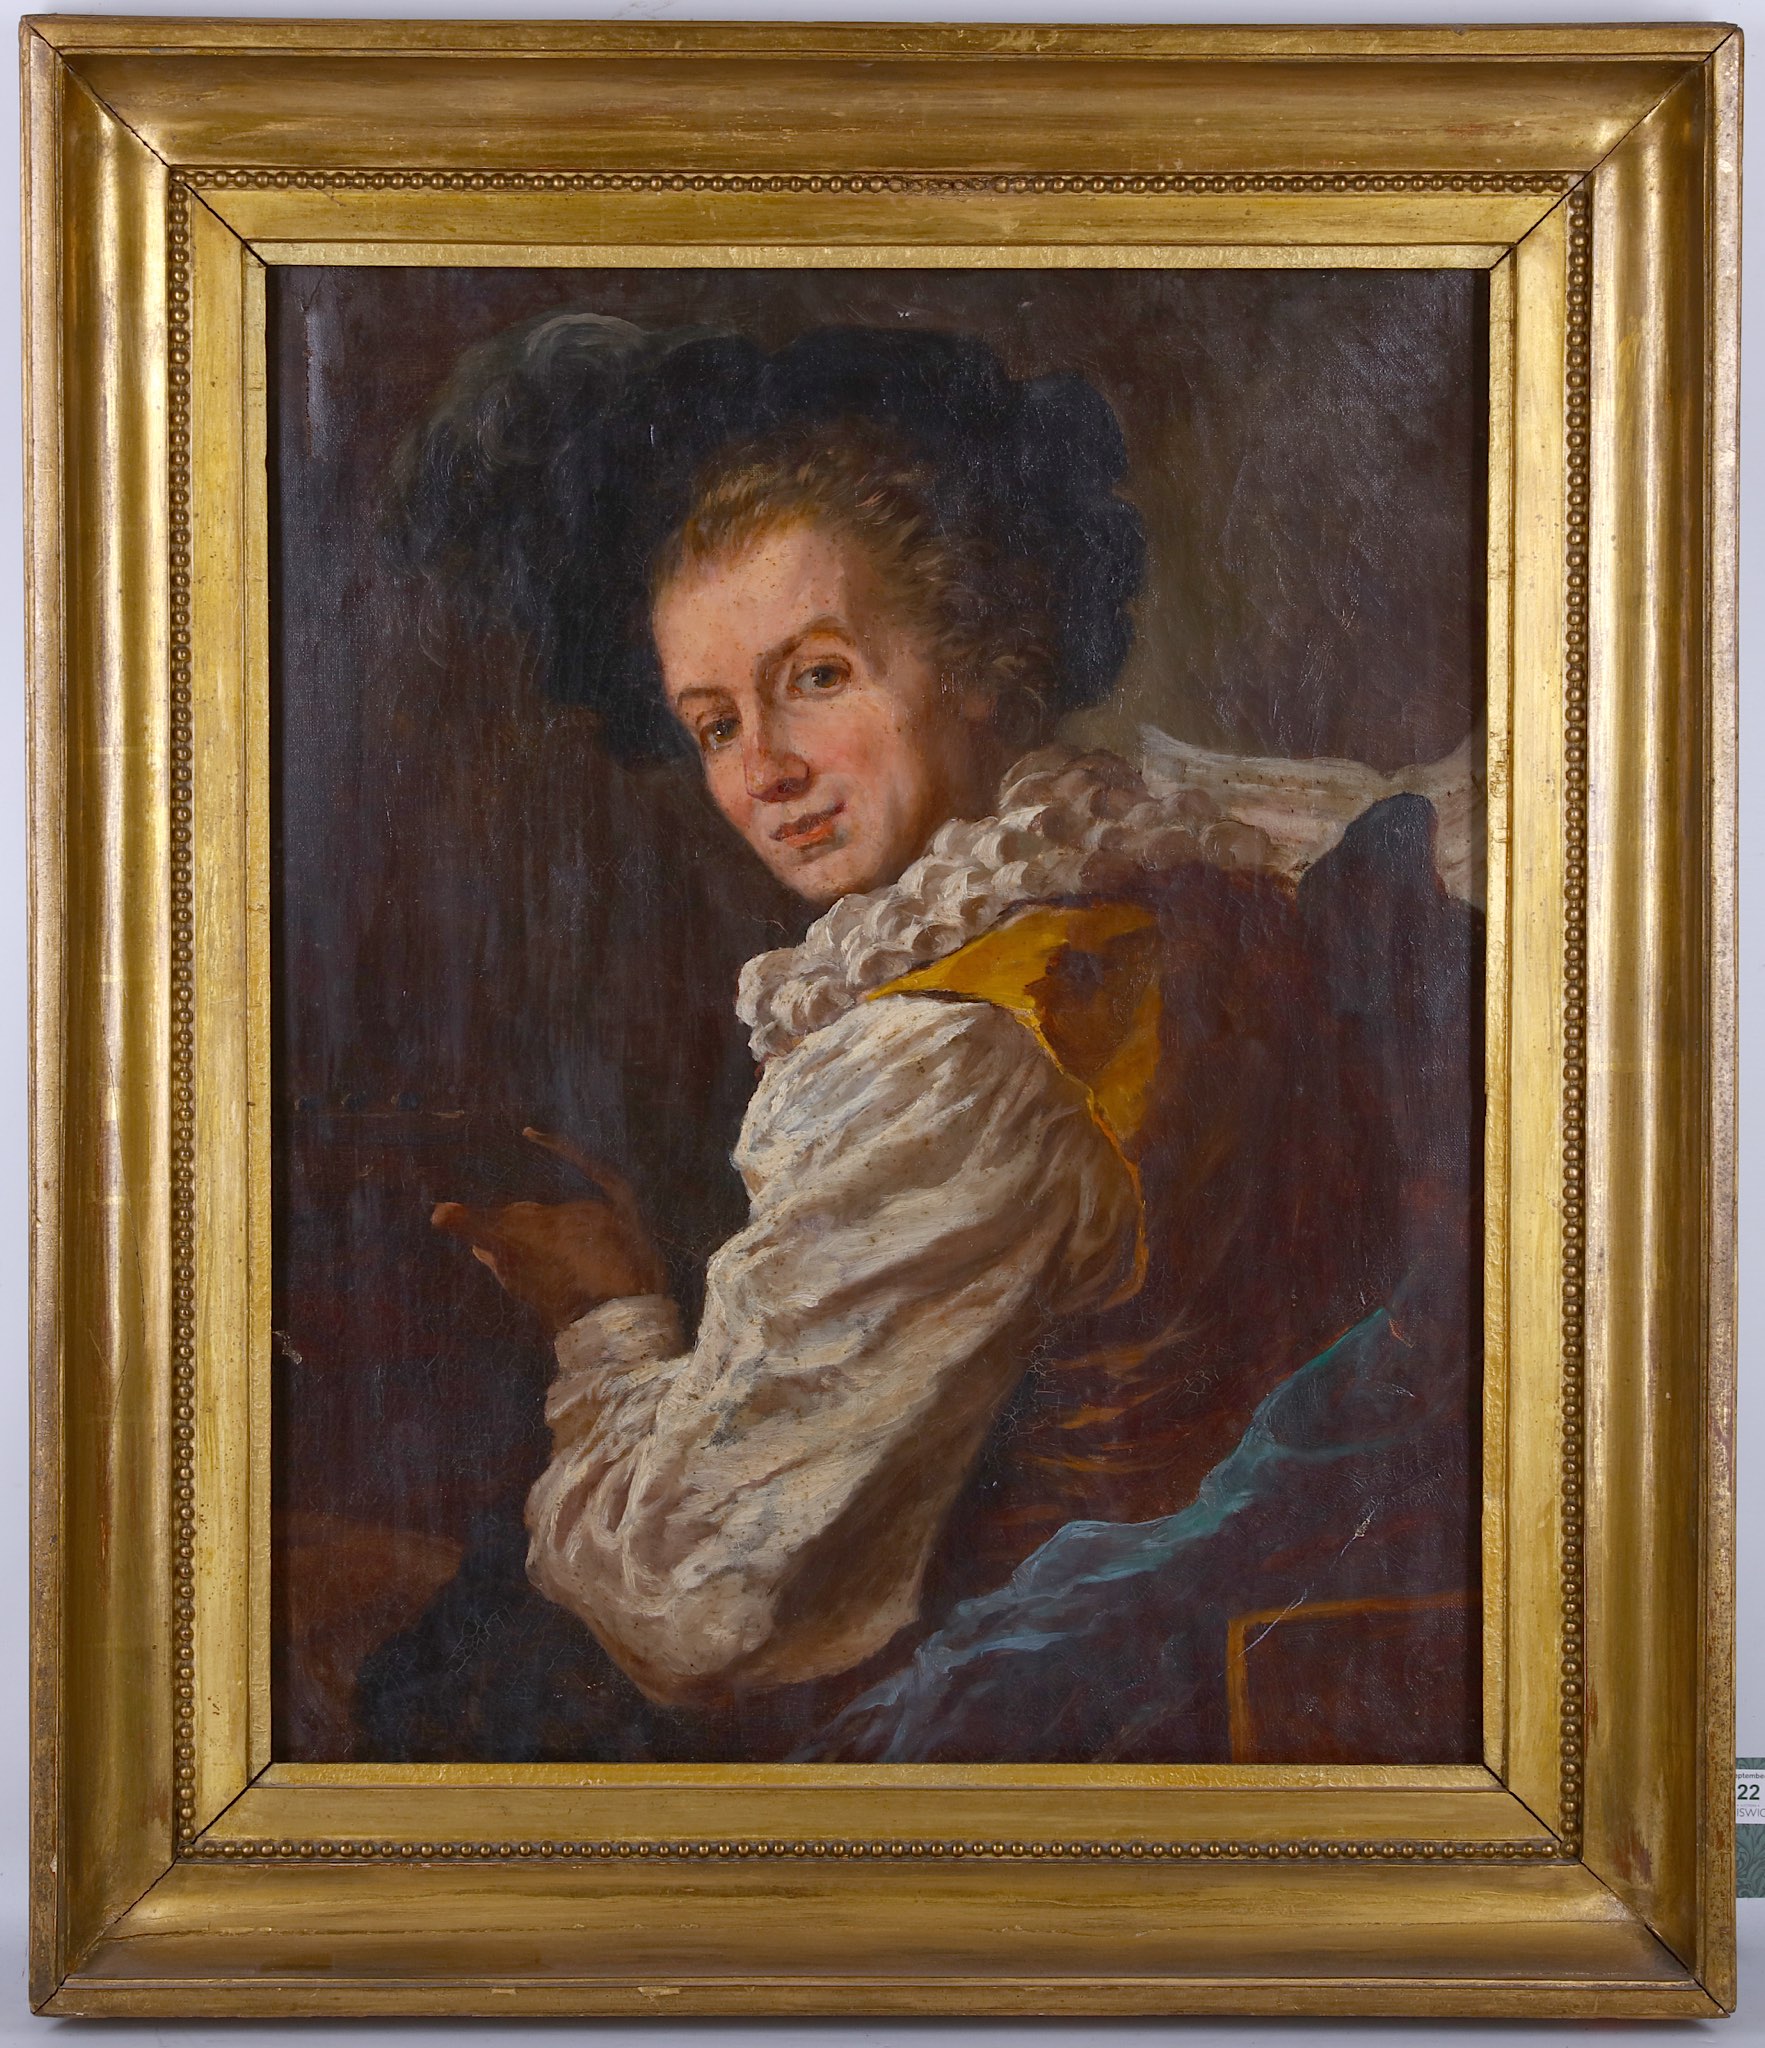 Mid 19th Century French school. 'Portrait of a Female Lute Player'. Oil on canvas. Inscribed